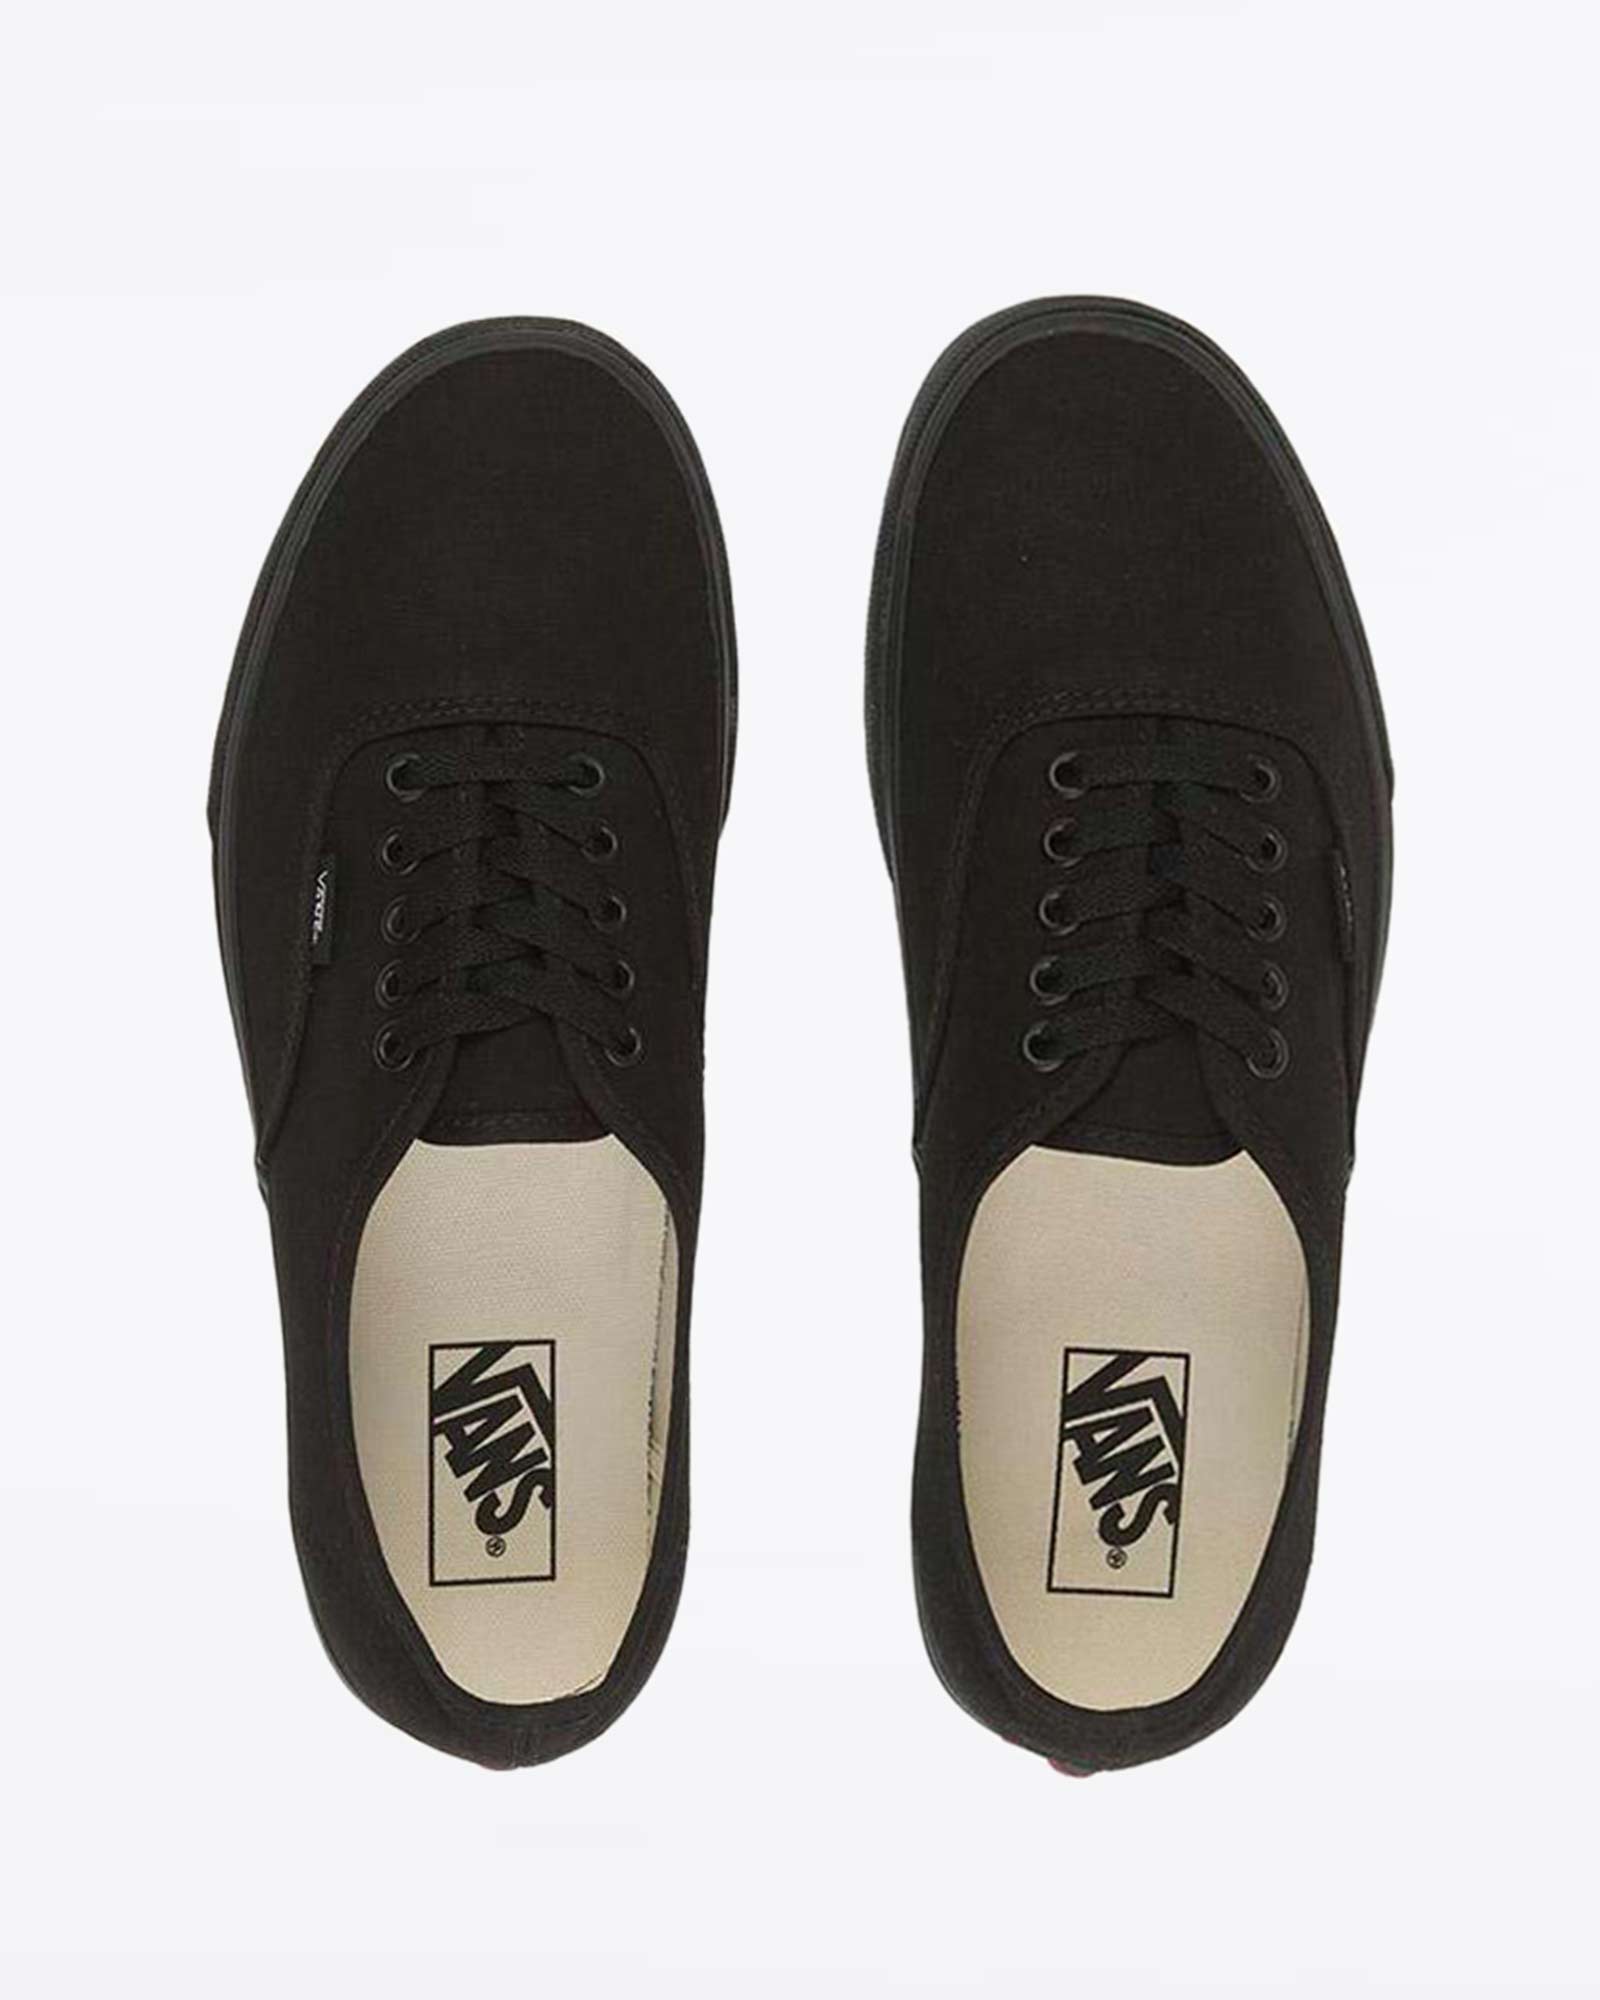 Vans Classic Slip on Croc Leather Black Sneaker Editorial Photo - Image of  fashion, shoe: 151727381